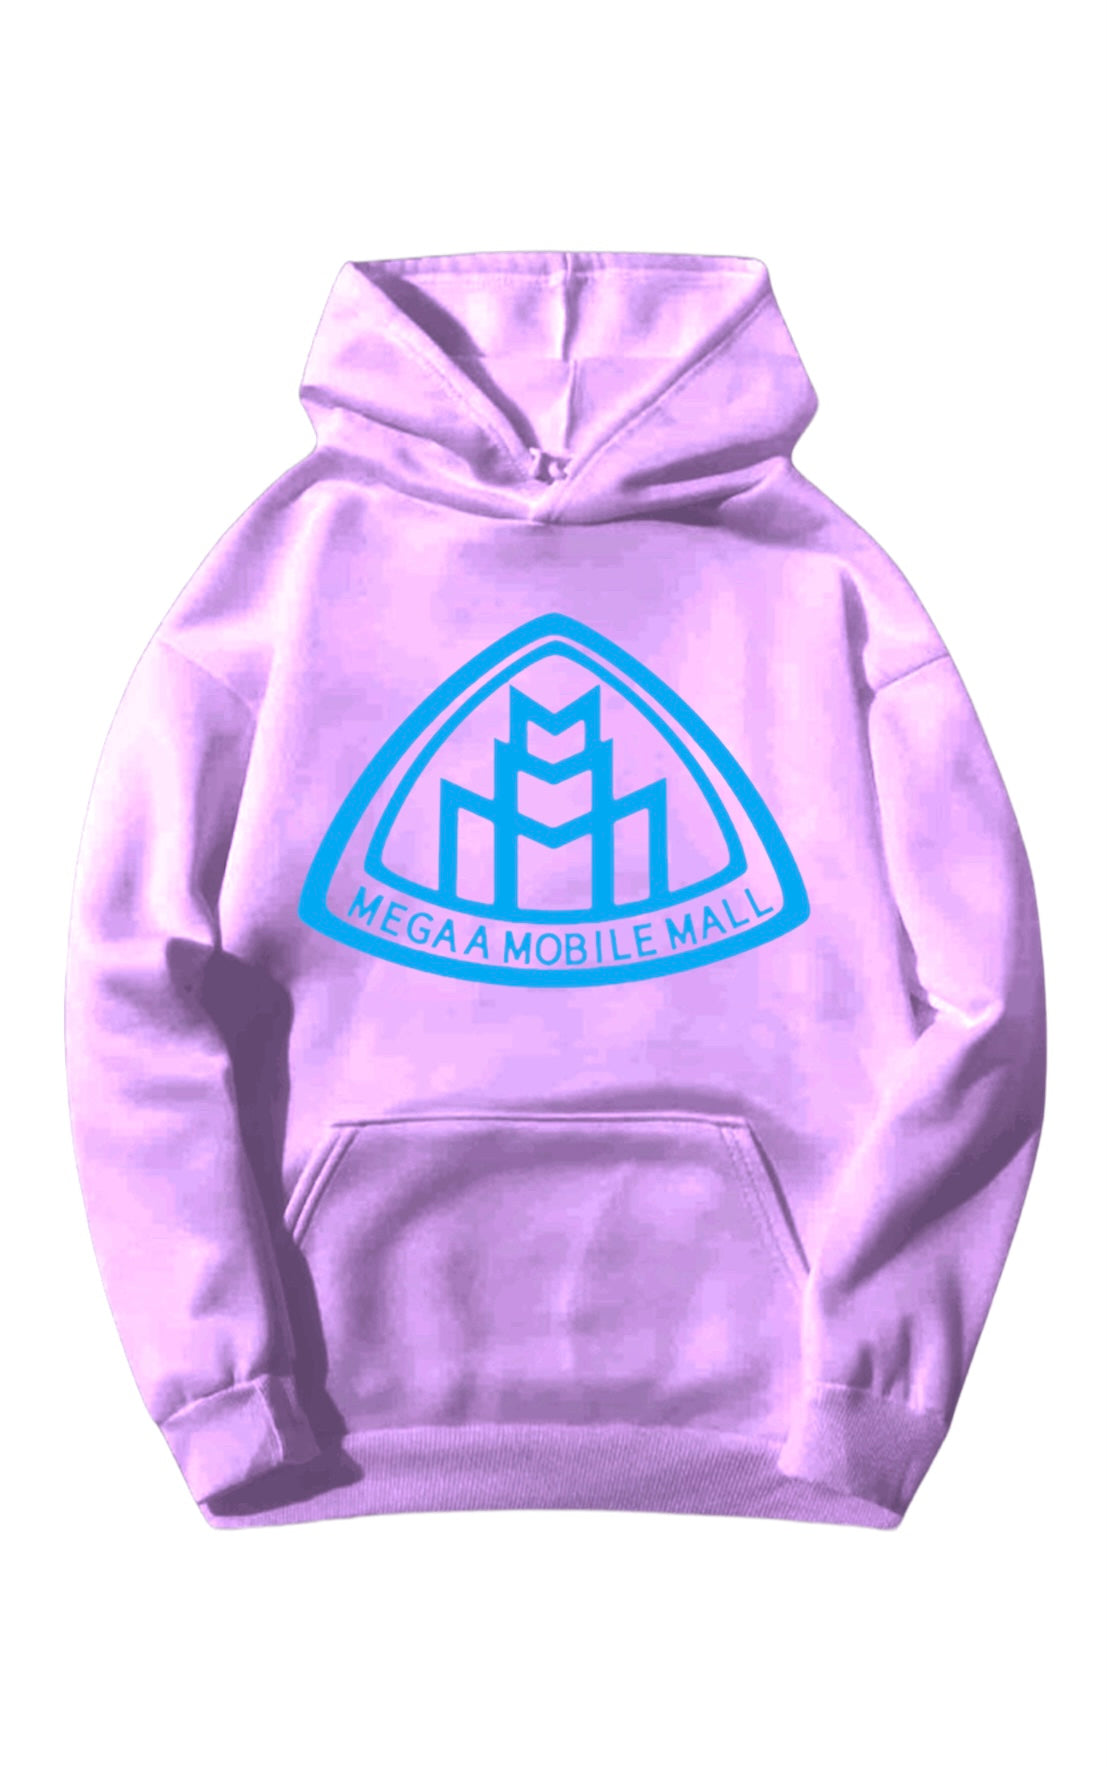 lilac megaamobilemall logo Heavy Blend Fleece Hoodie with sky blue logo